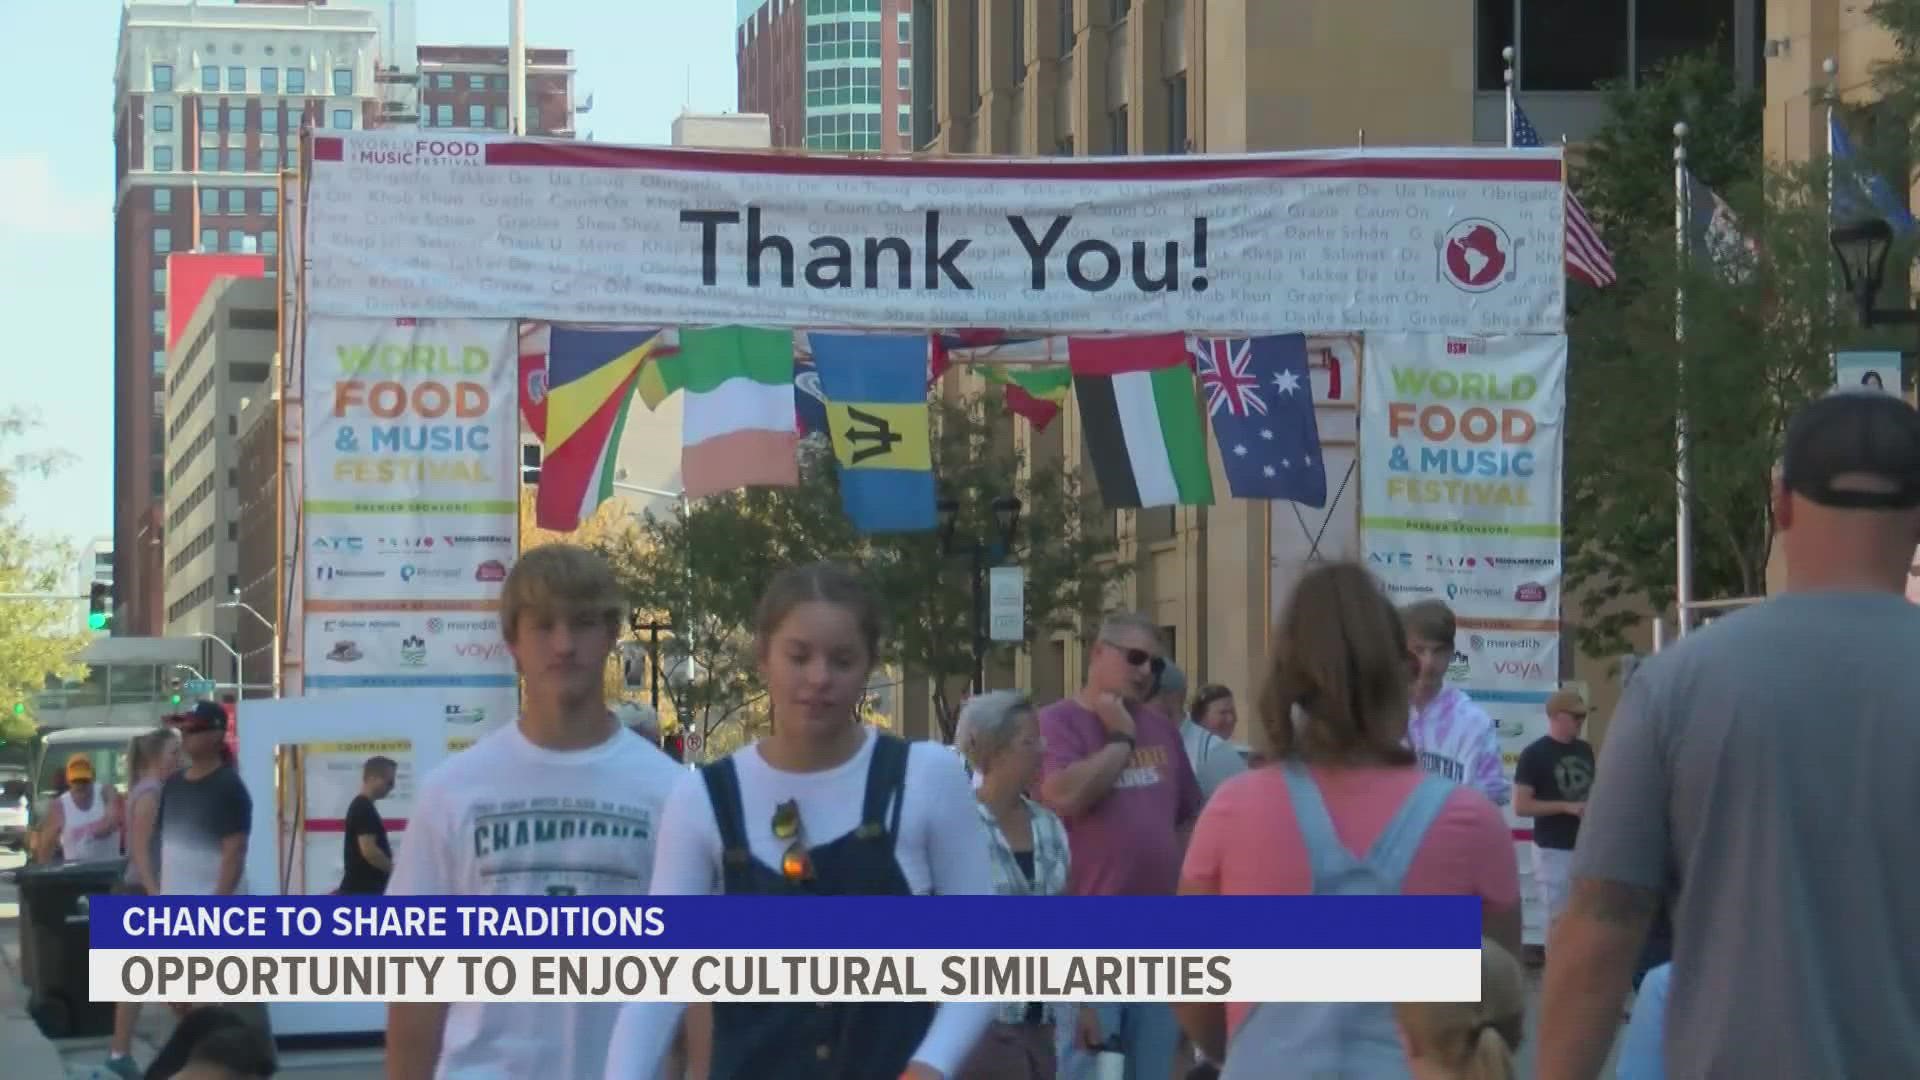 40 food vendors representing 25 different countries were cooking at the event.